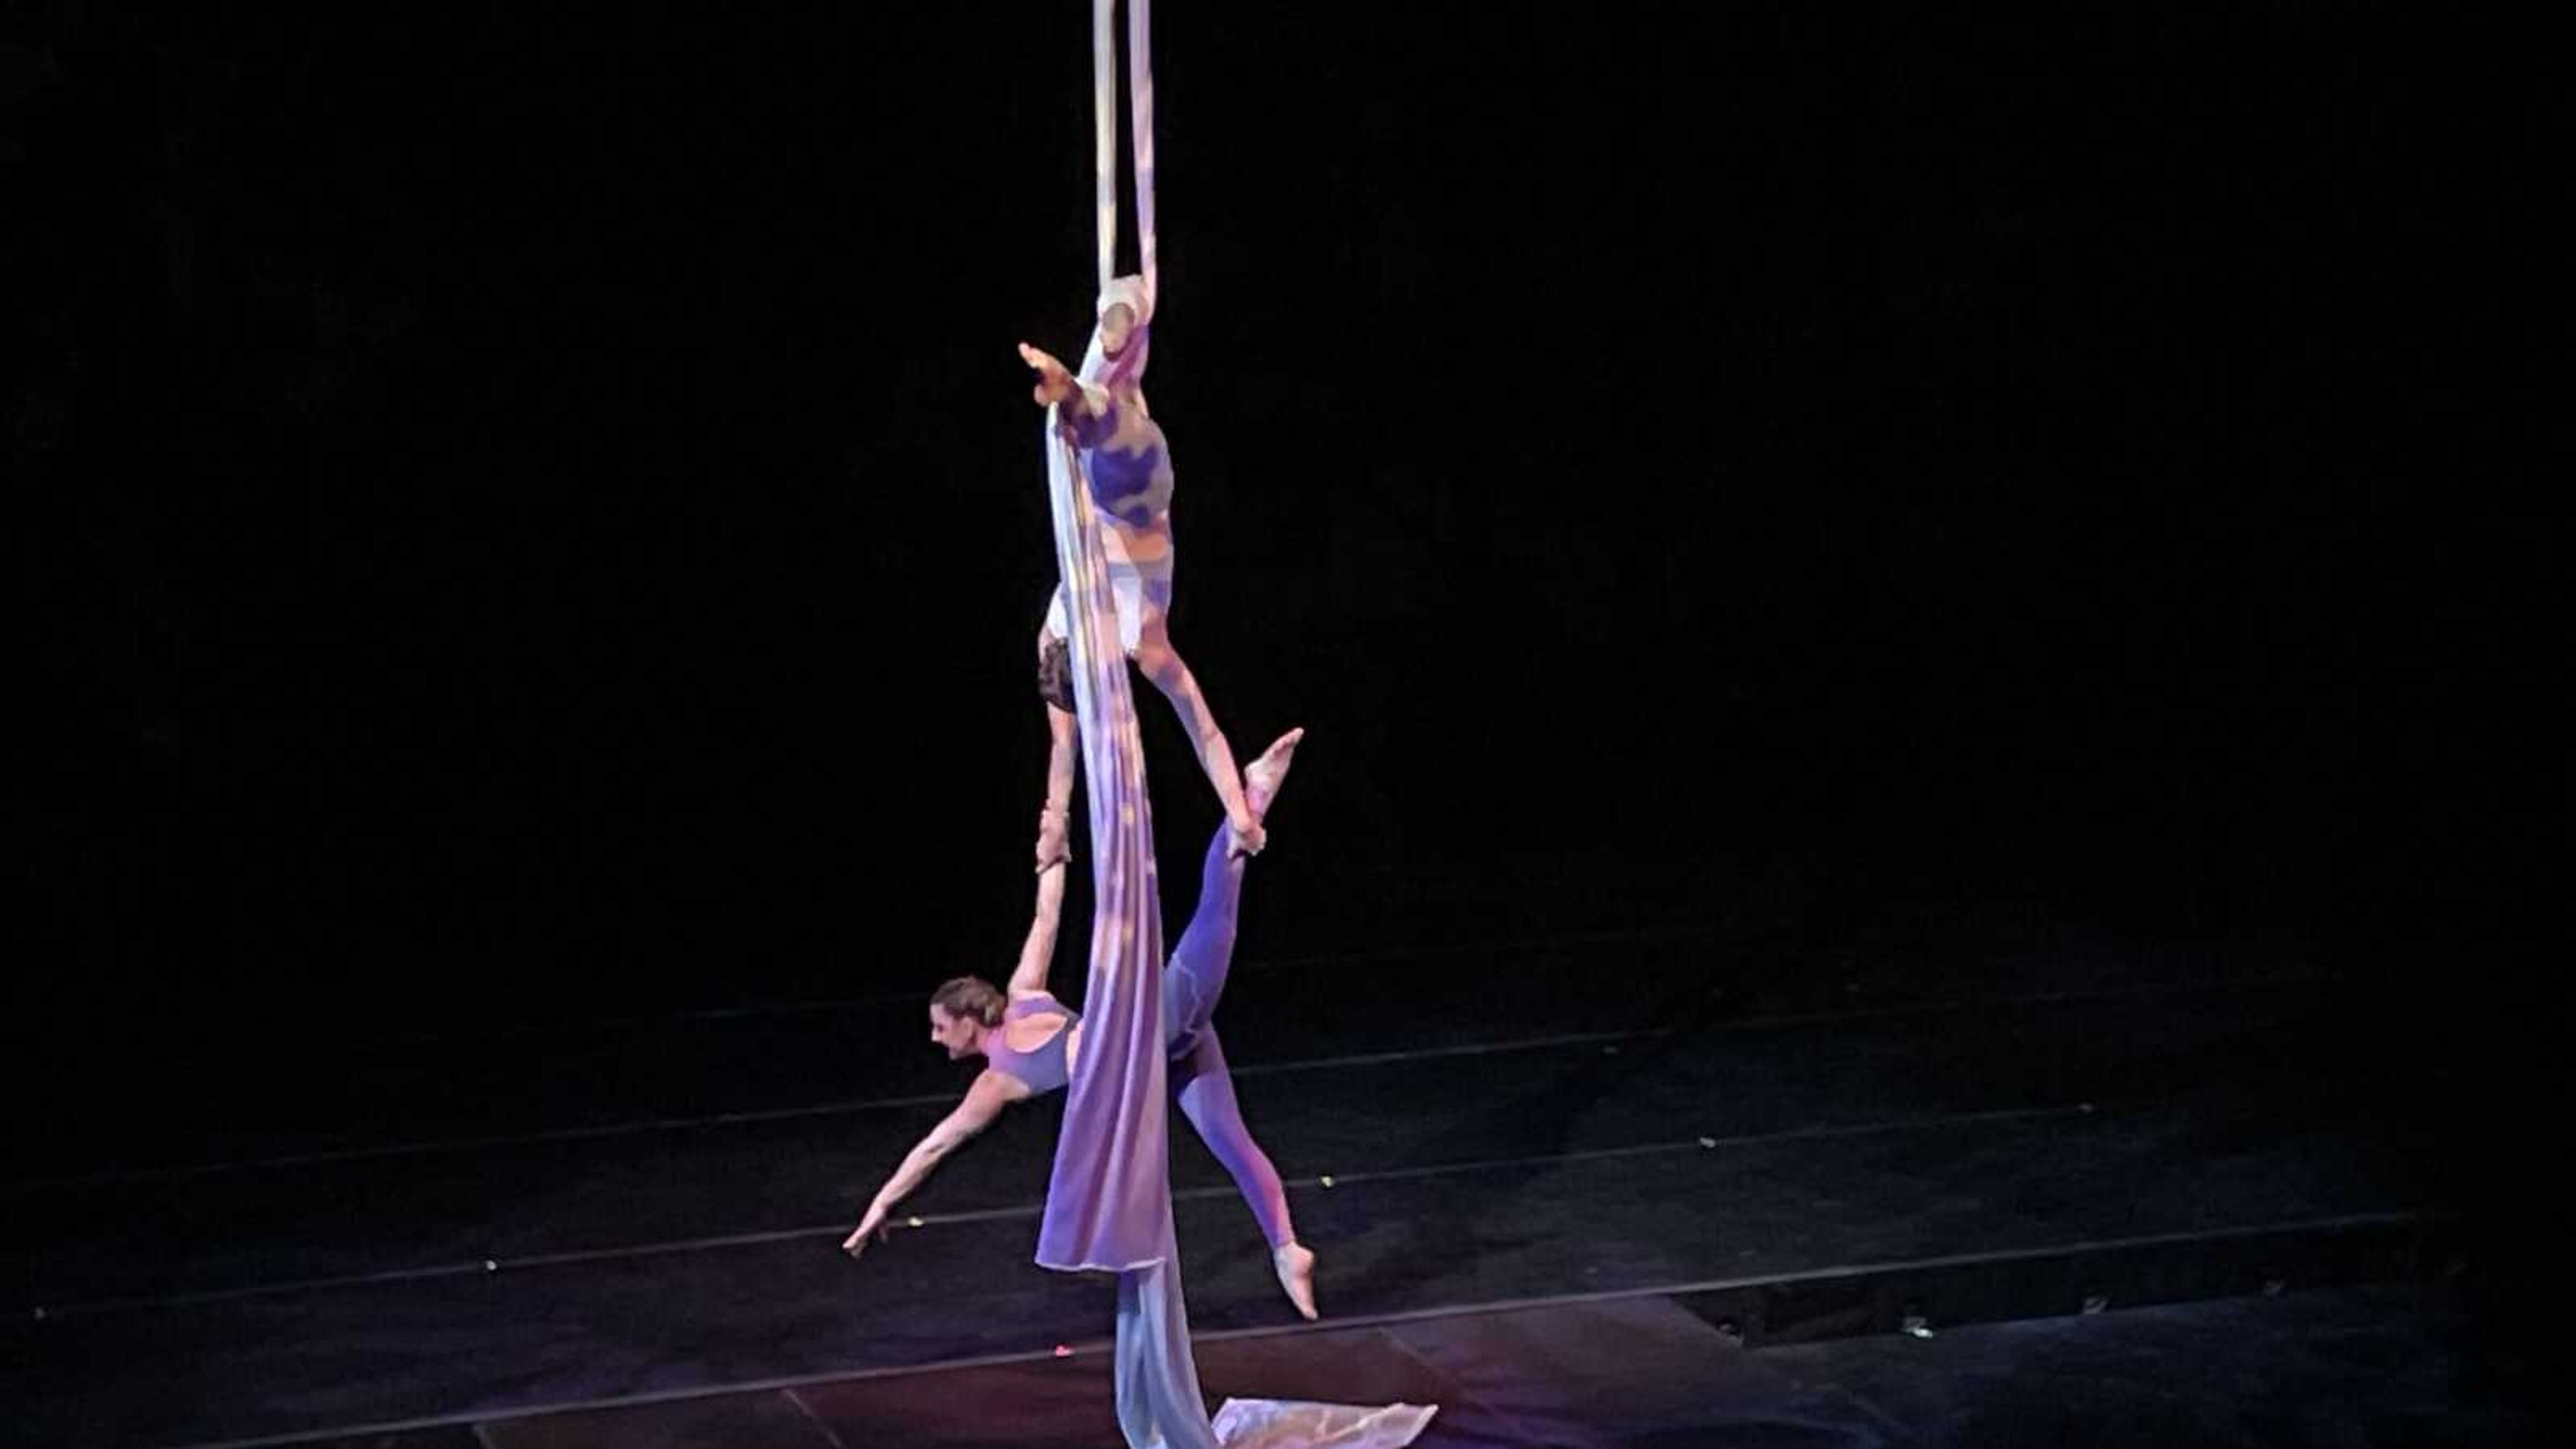 Dancers perform aerial acrobatics on silks during the Spring into Dance 2022 show.